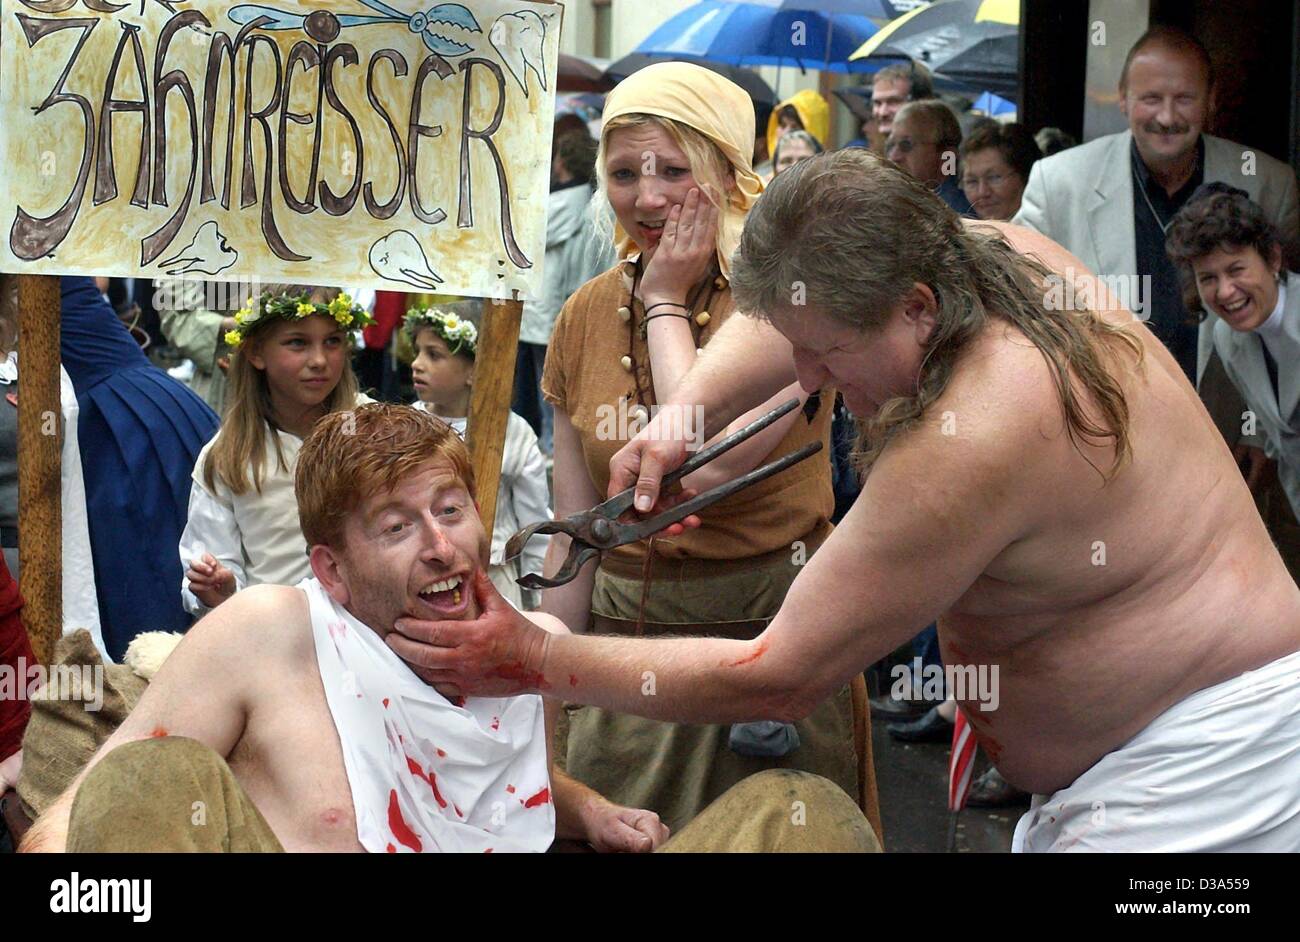 (dpa) - The work of a medieval 'tooth ripper' is re-enacted by members of the 'Historia Viva' club during the 'Luther's Wedding' pageant in Wittenberg, east Germany, 8 June 2002. The day marked the 477th wedding anniversary of reformer Martin Luther and the nun Katharina von Bora. Stock Photo